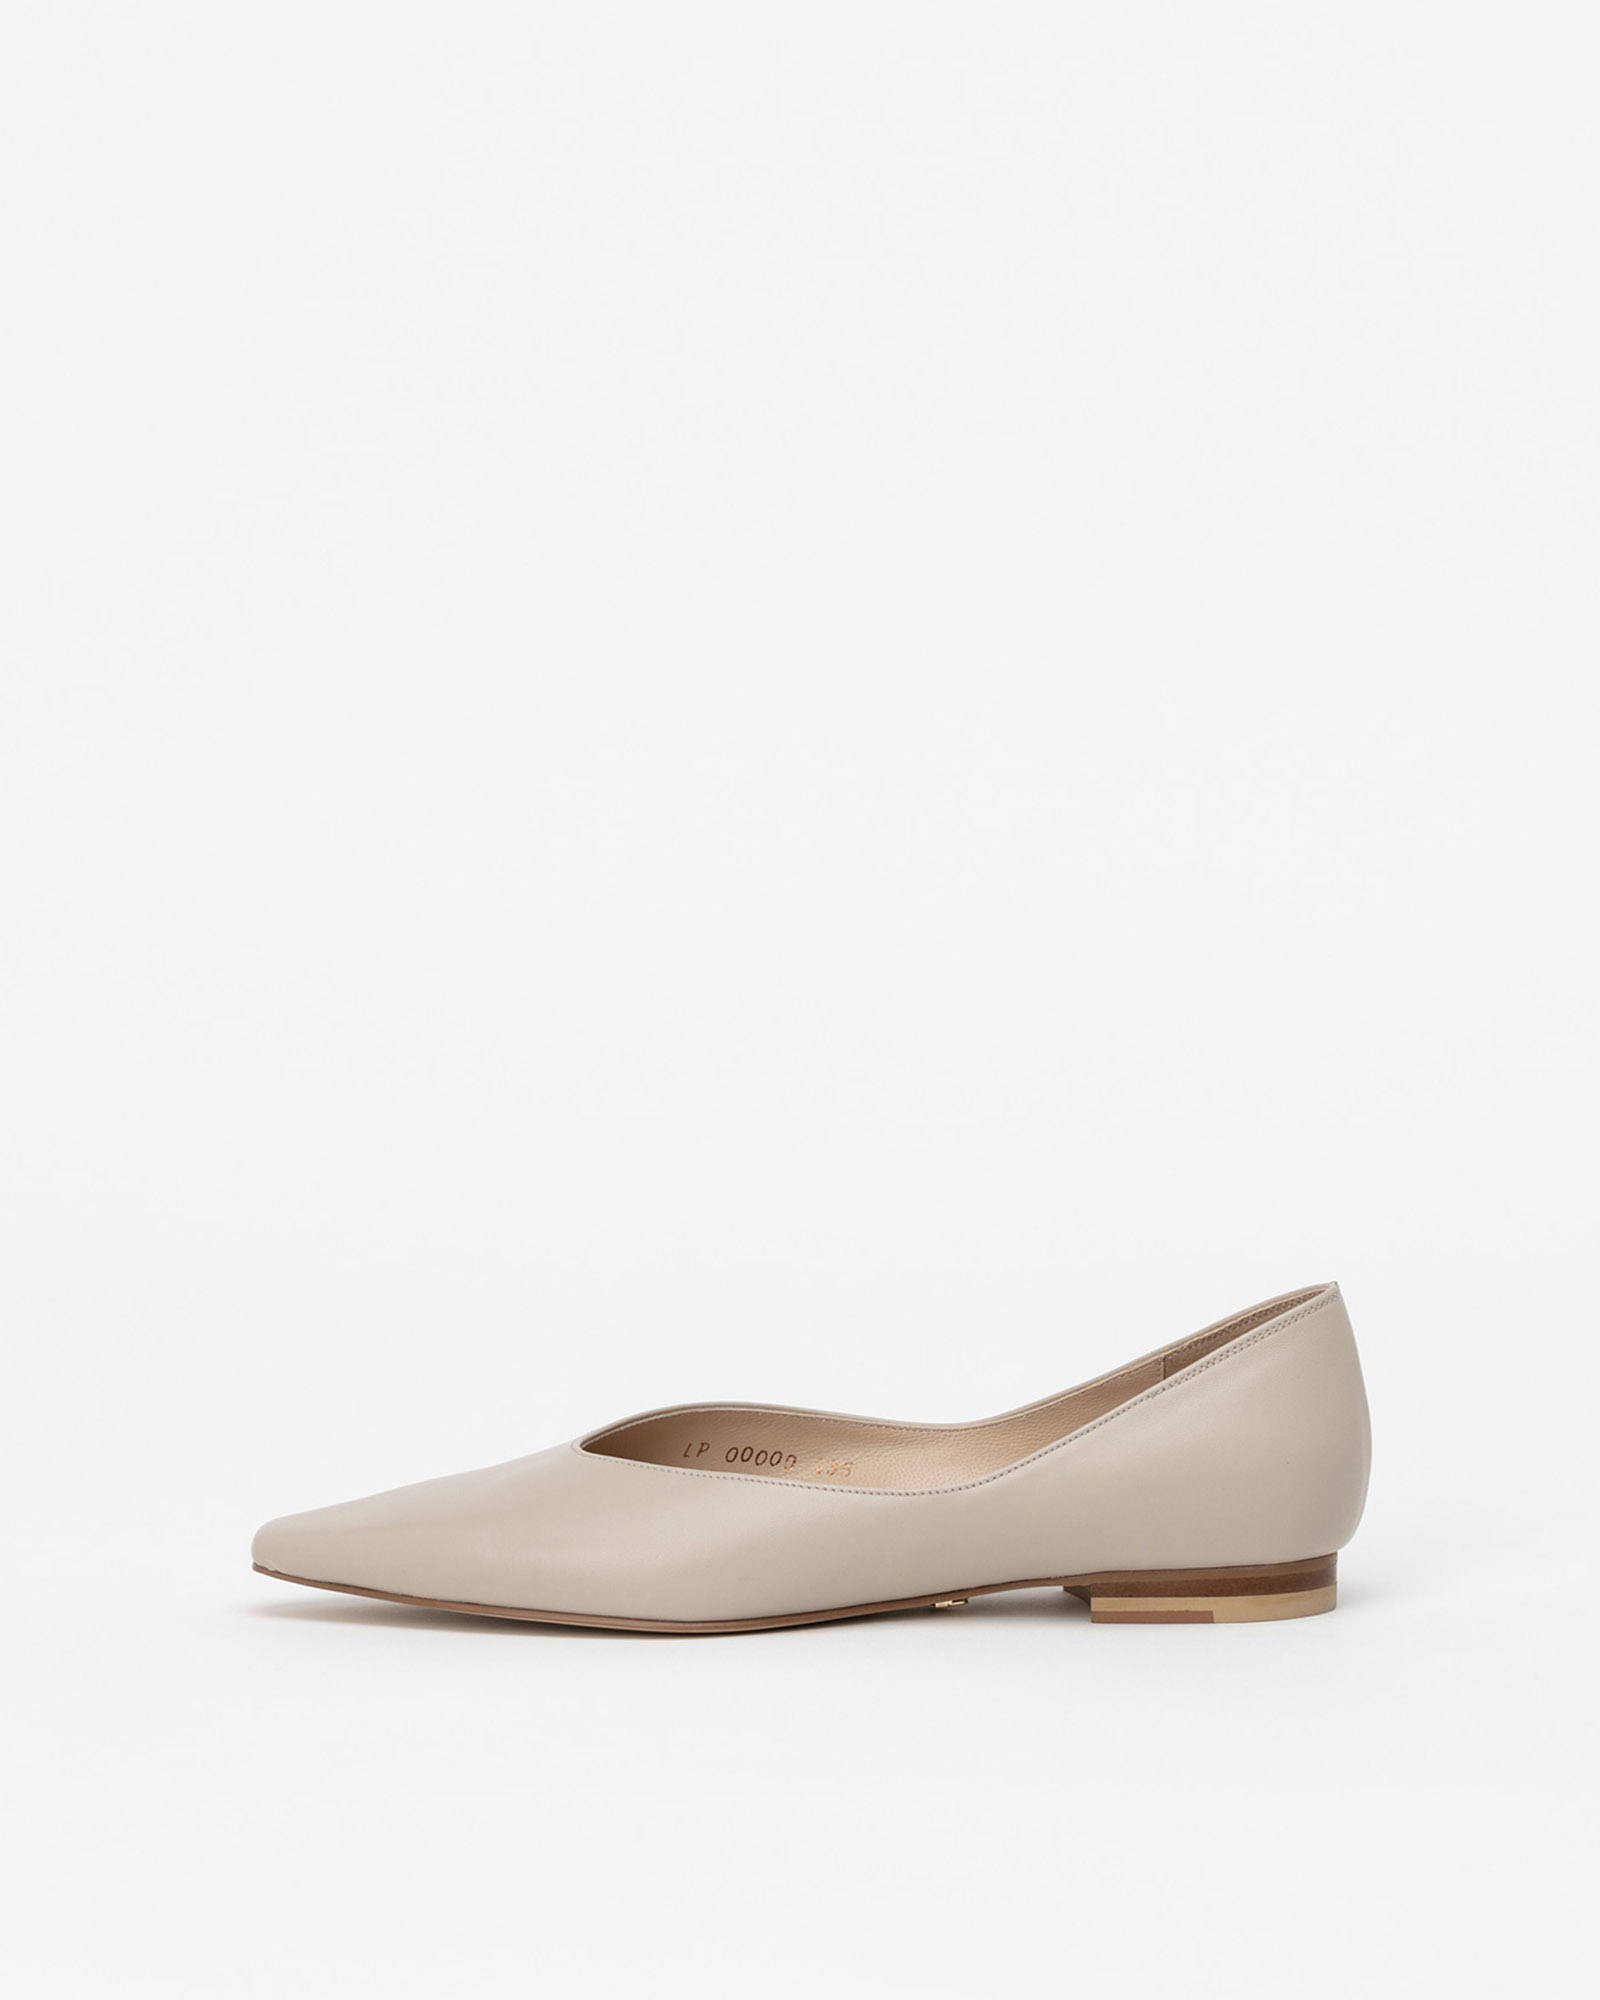 Yvonia Flat Shoes in Taupe Ivory